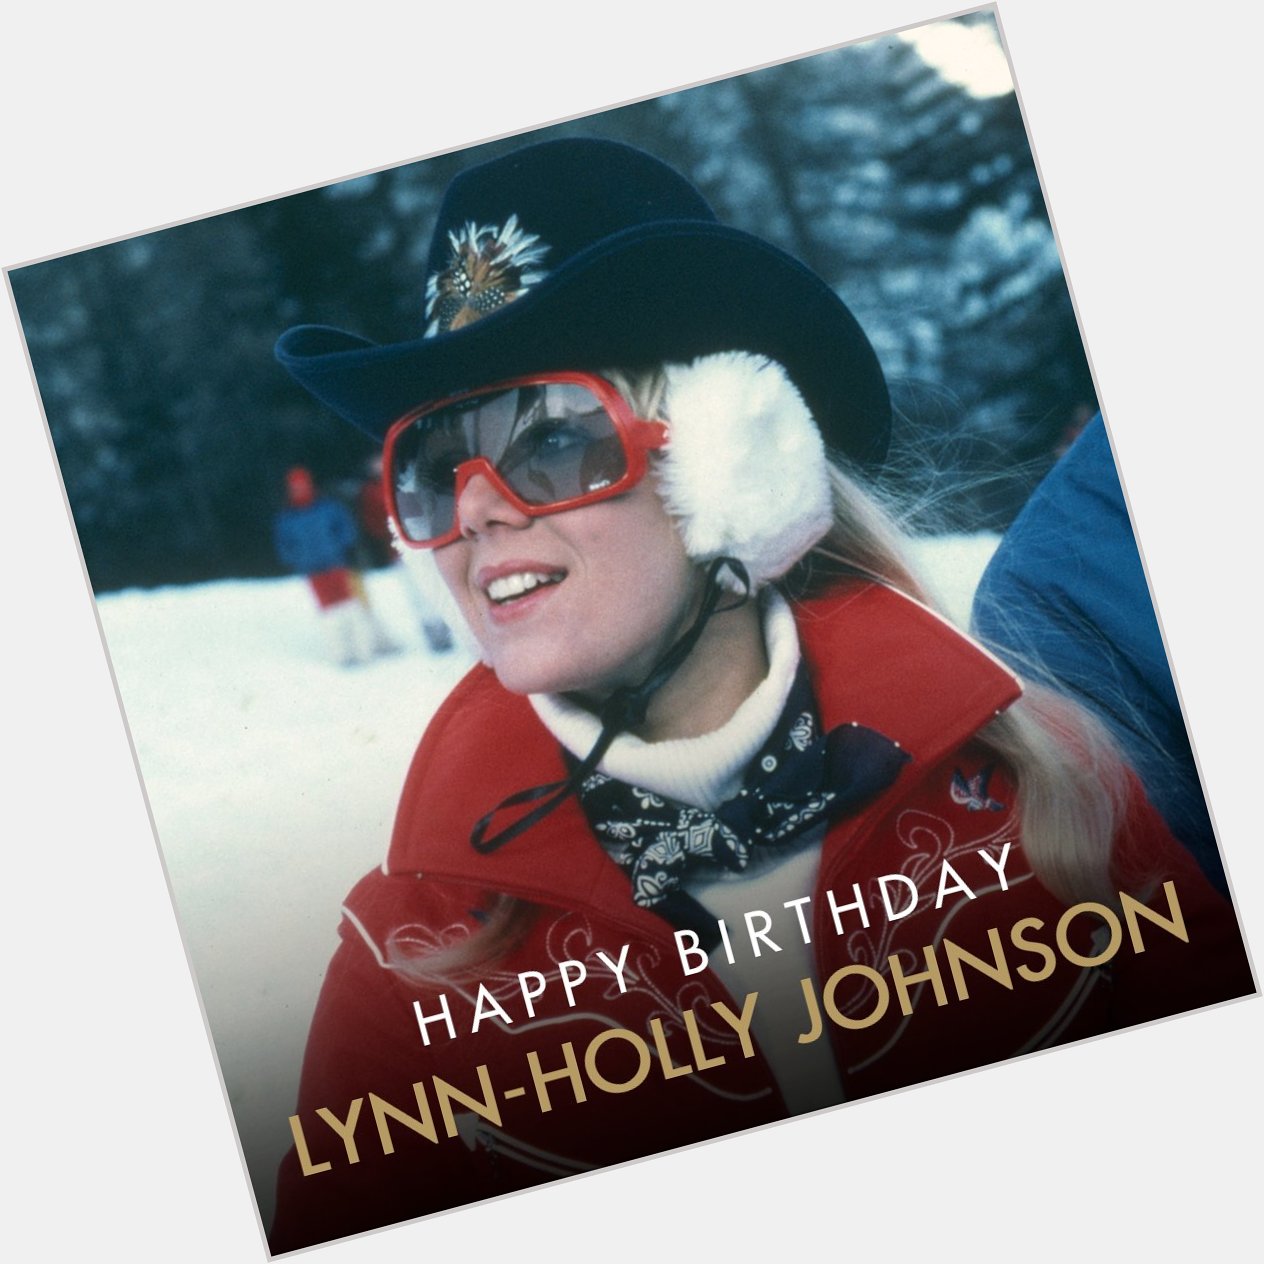 Happy Birthday to Lynn Holly Johnson who played skating superstar Bibi Dahl in FOR YOUR EYES ONLY. 